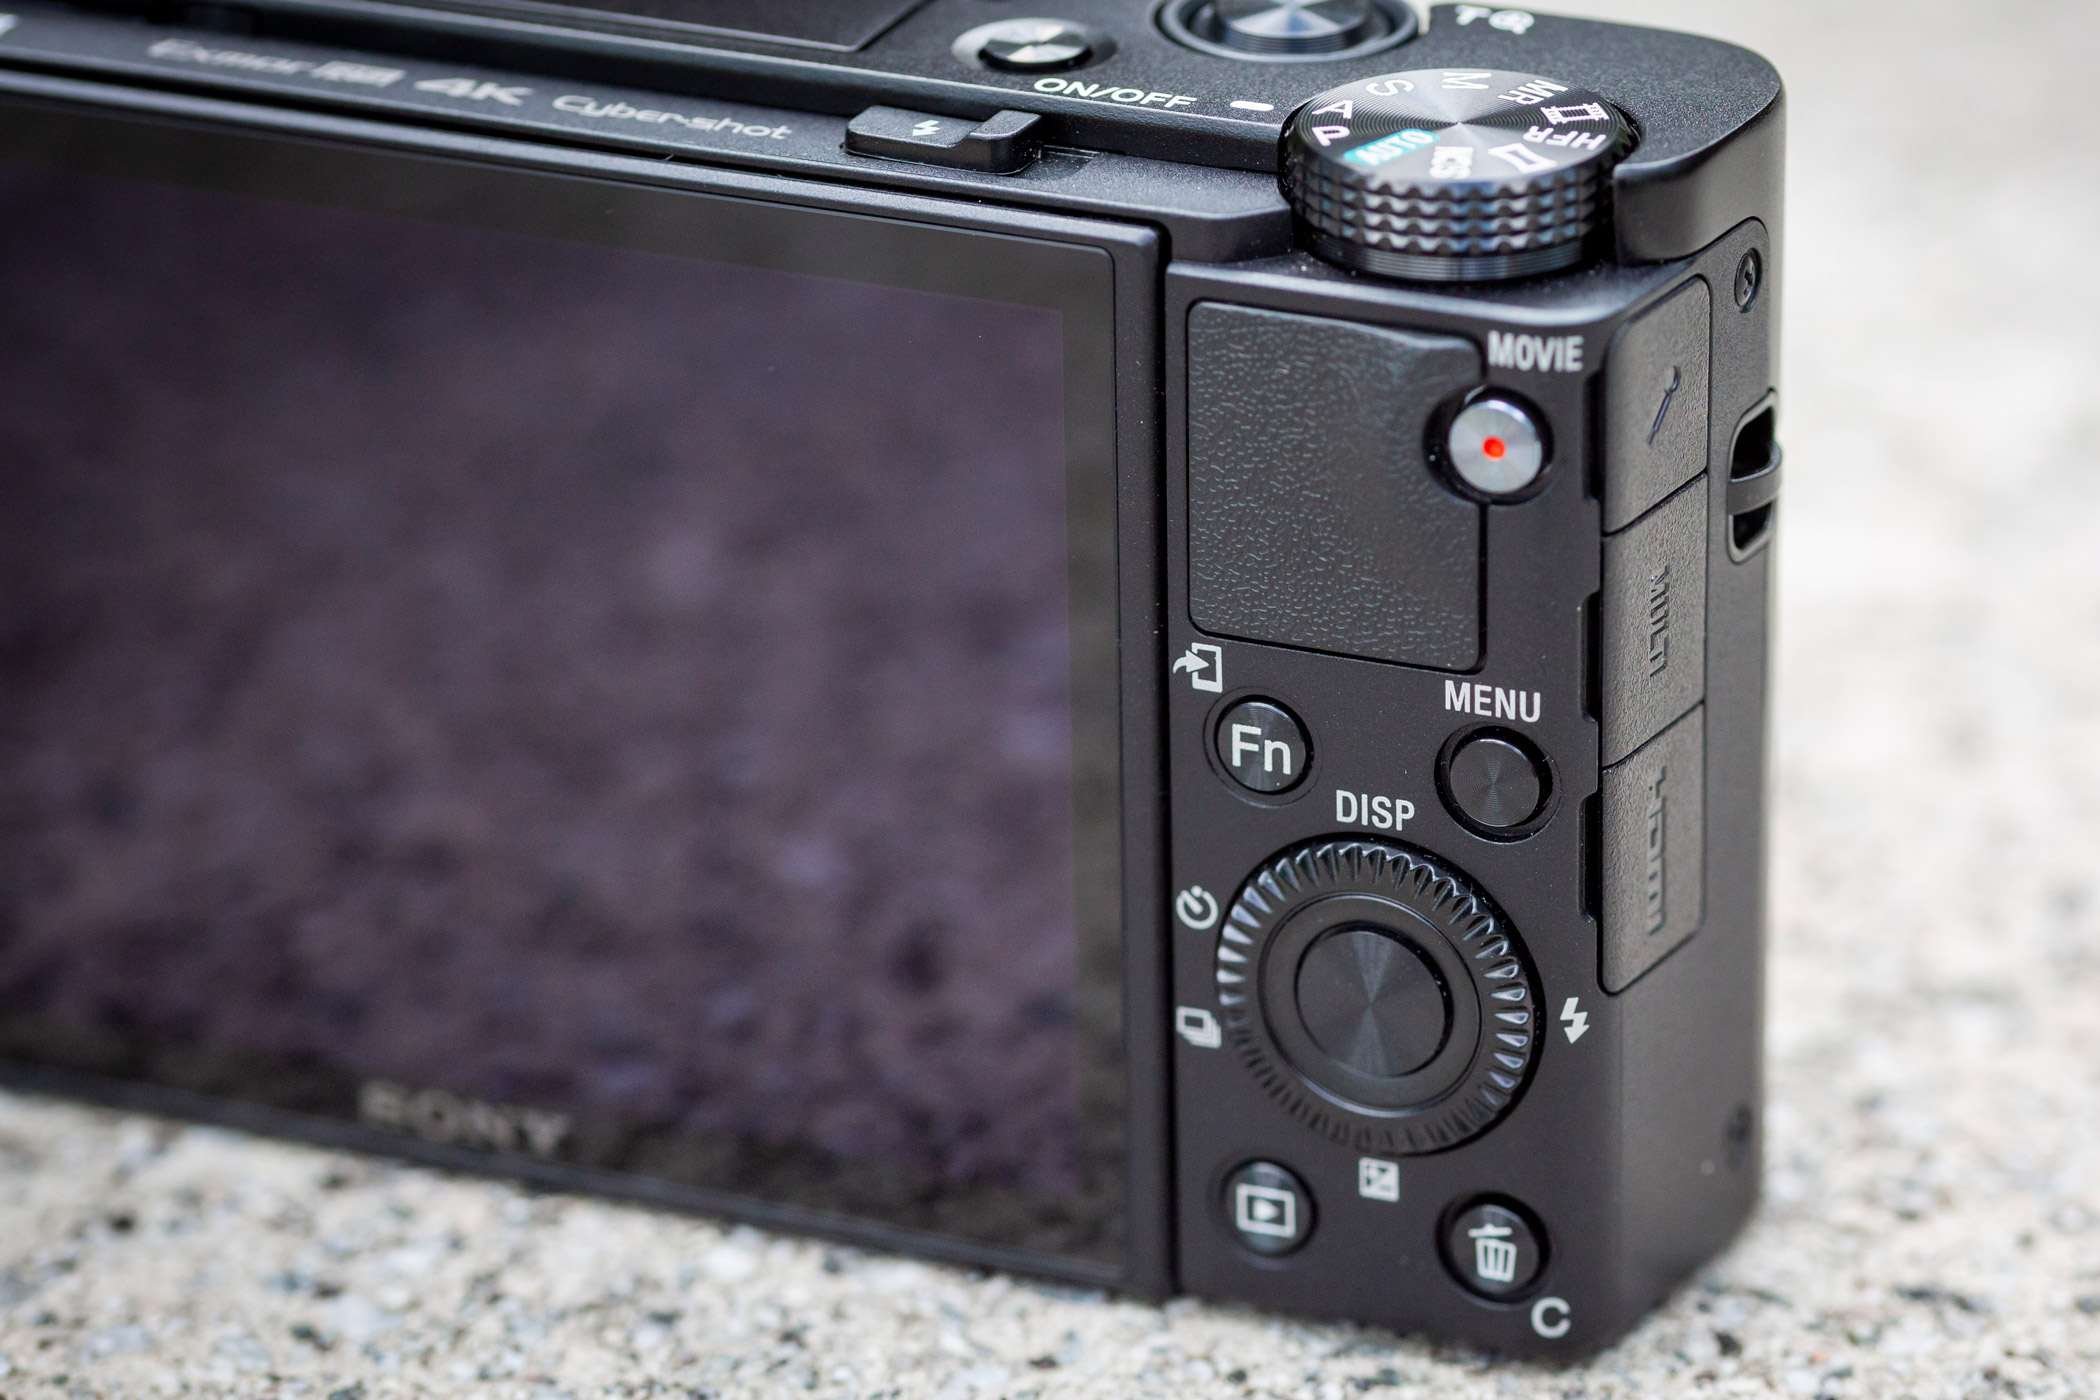 Sony Cybershot RX100 VII review